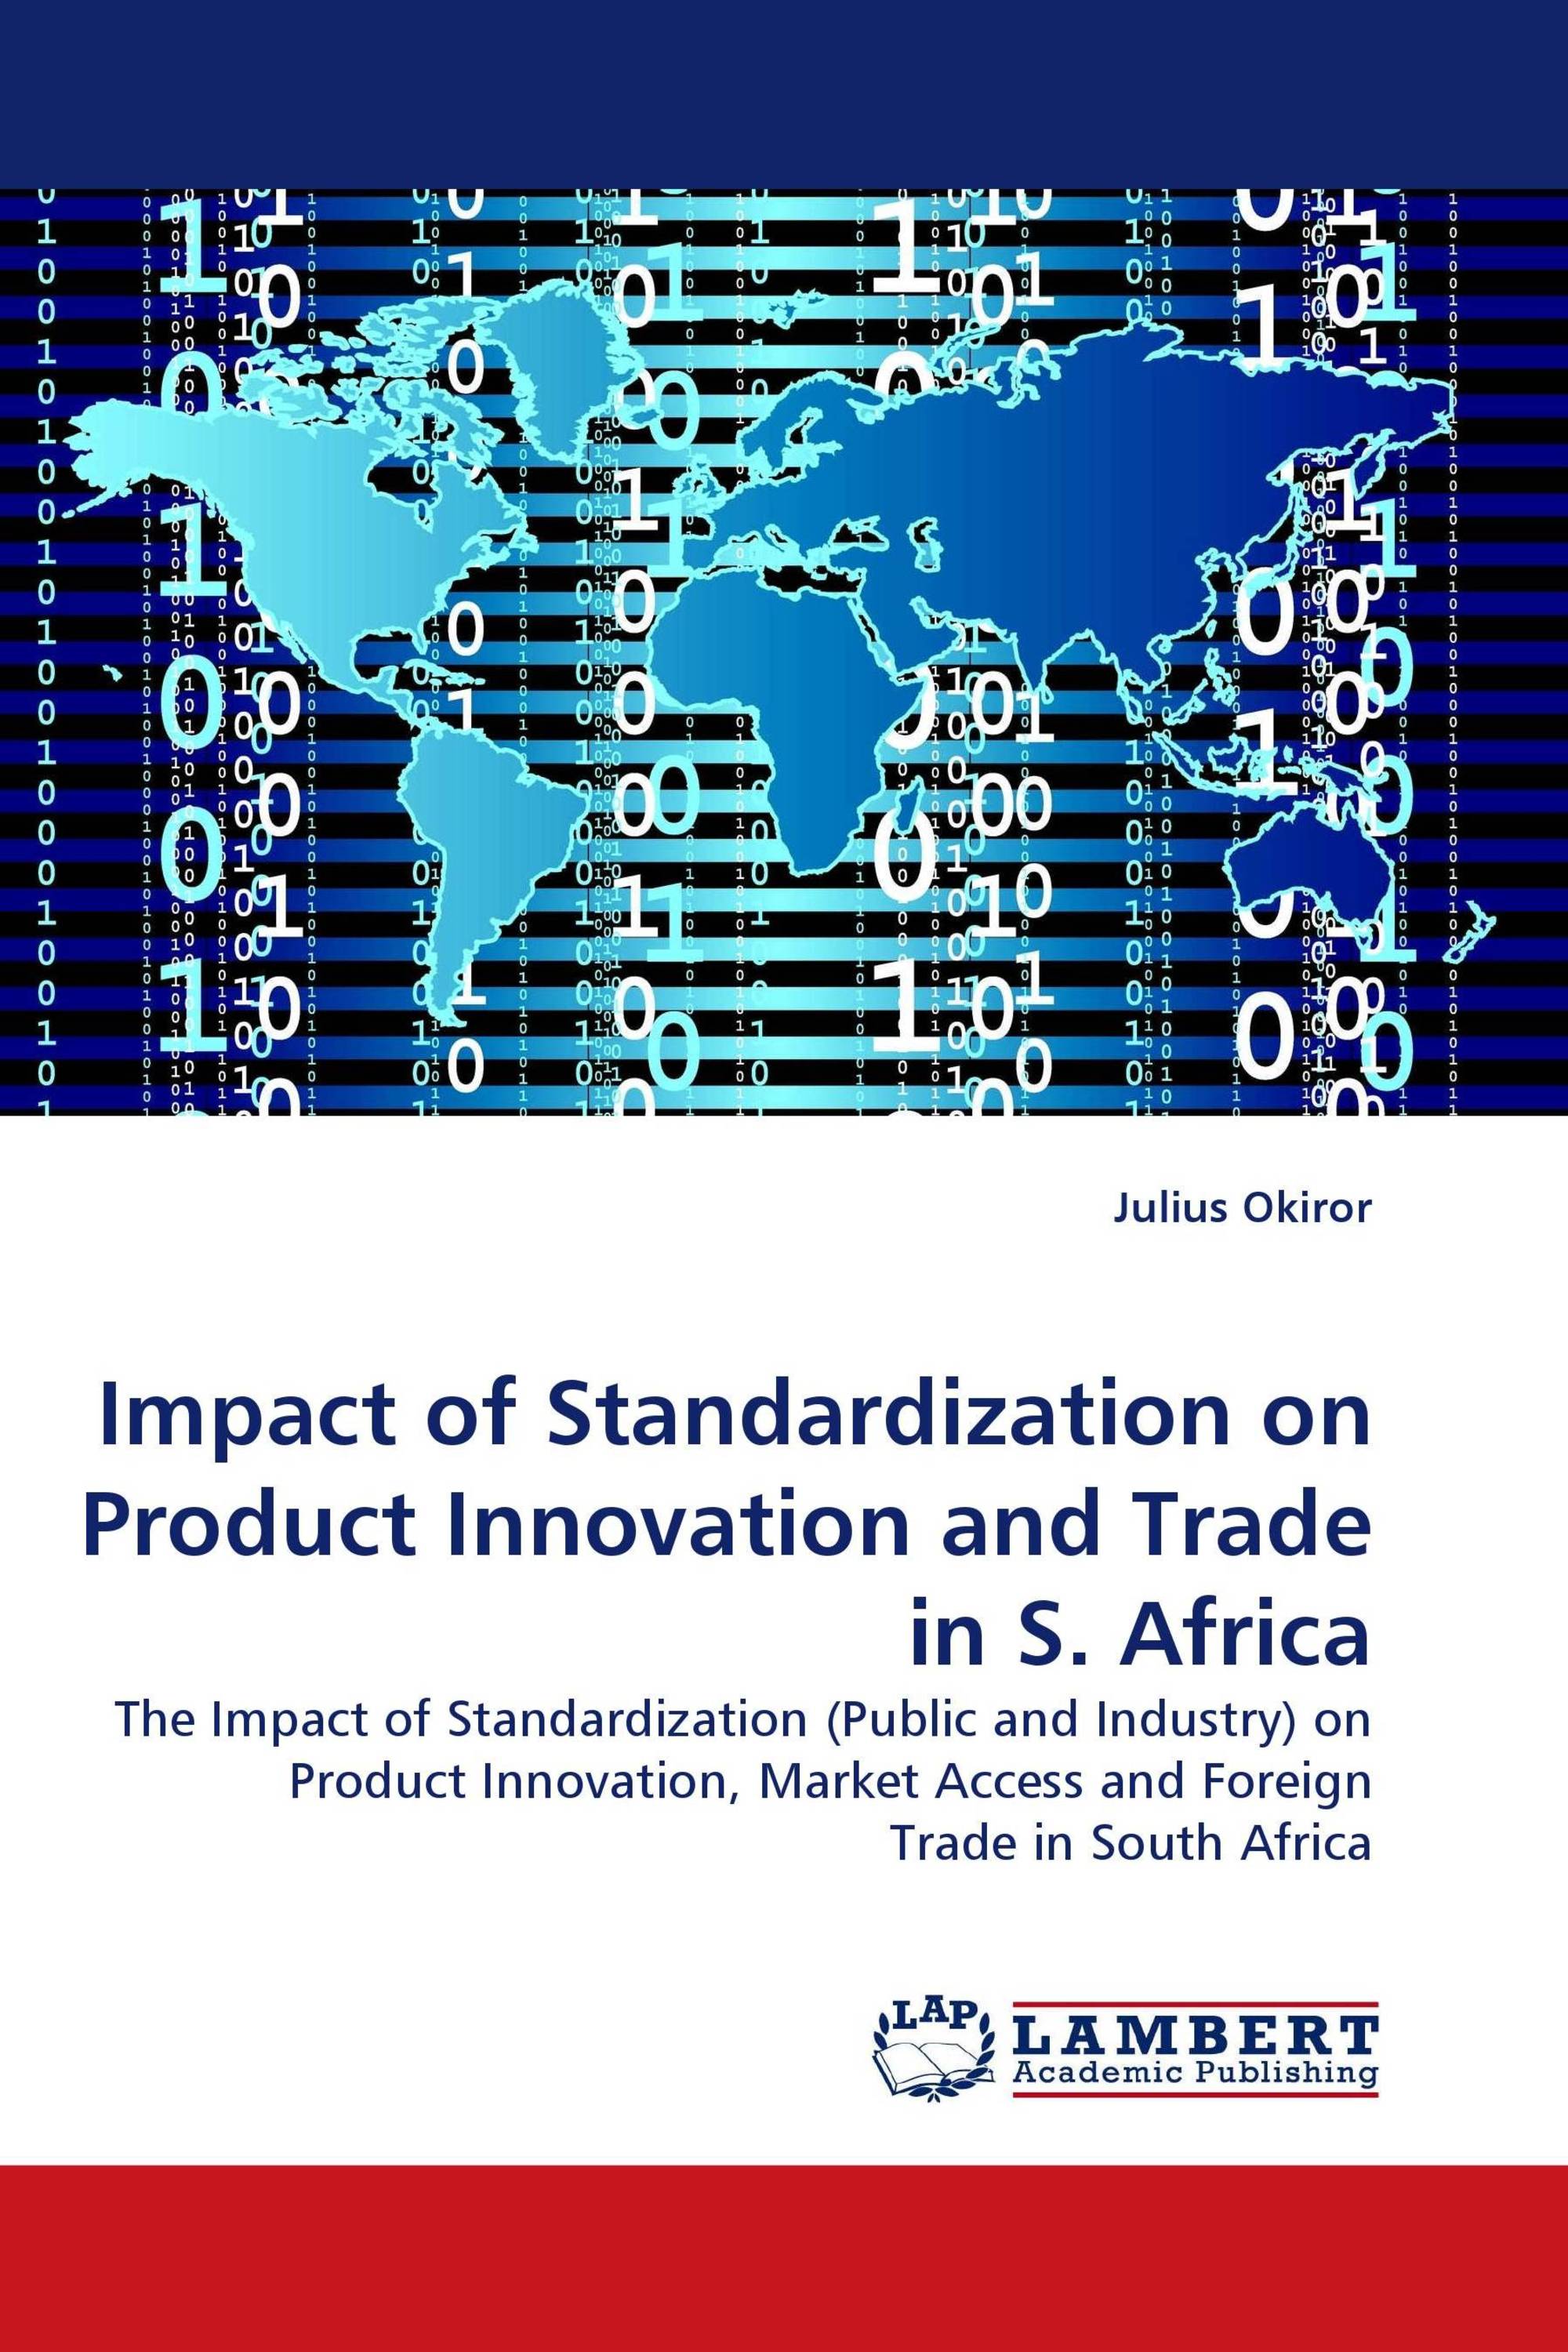 Impact of Standardization on Product Innovation and Trade in S. Africa